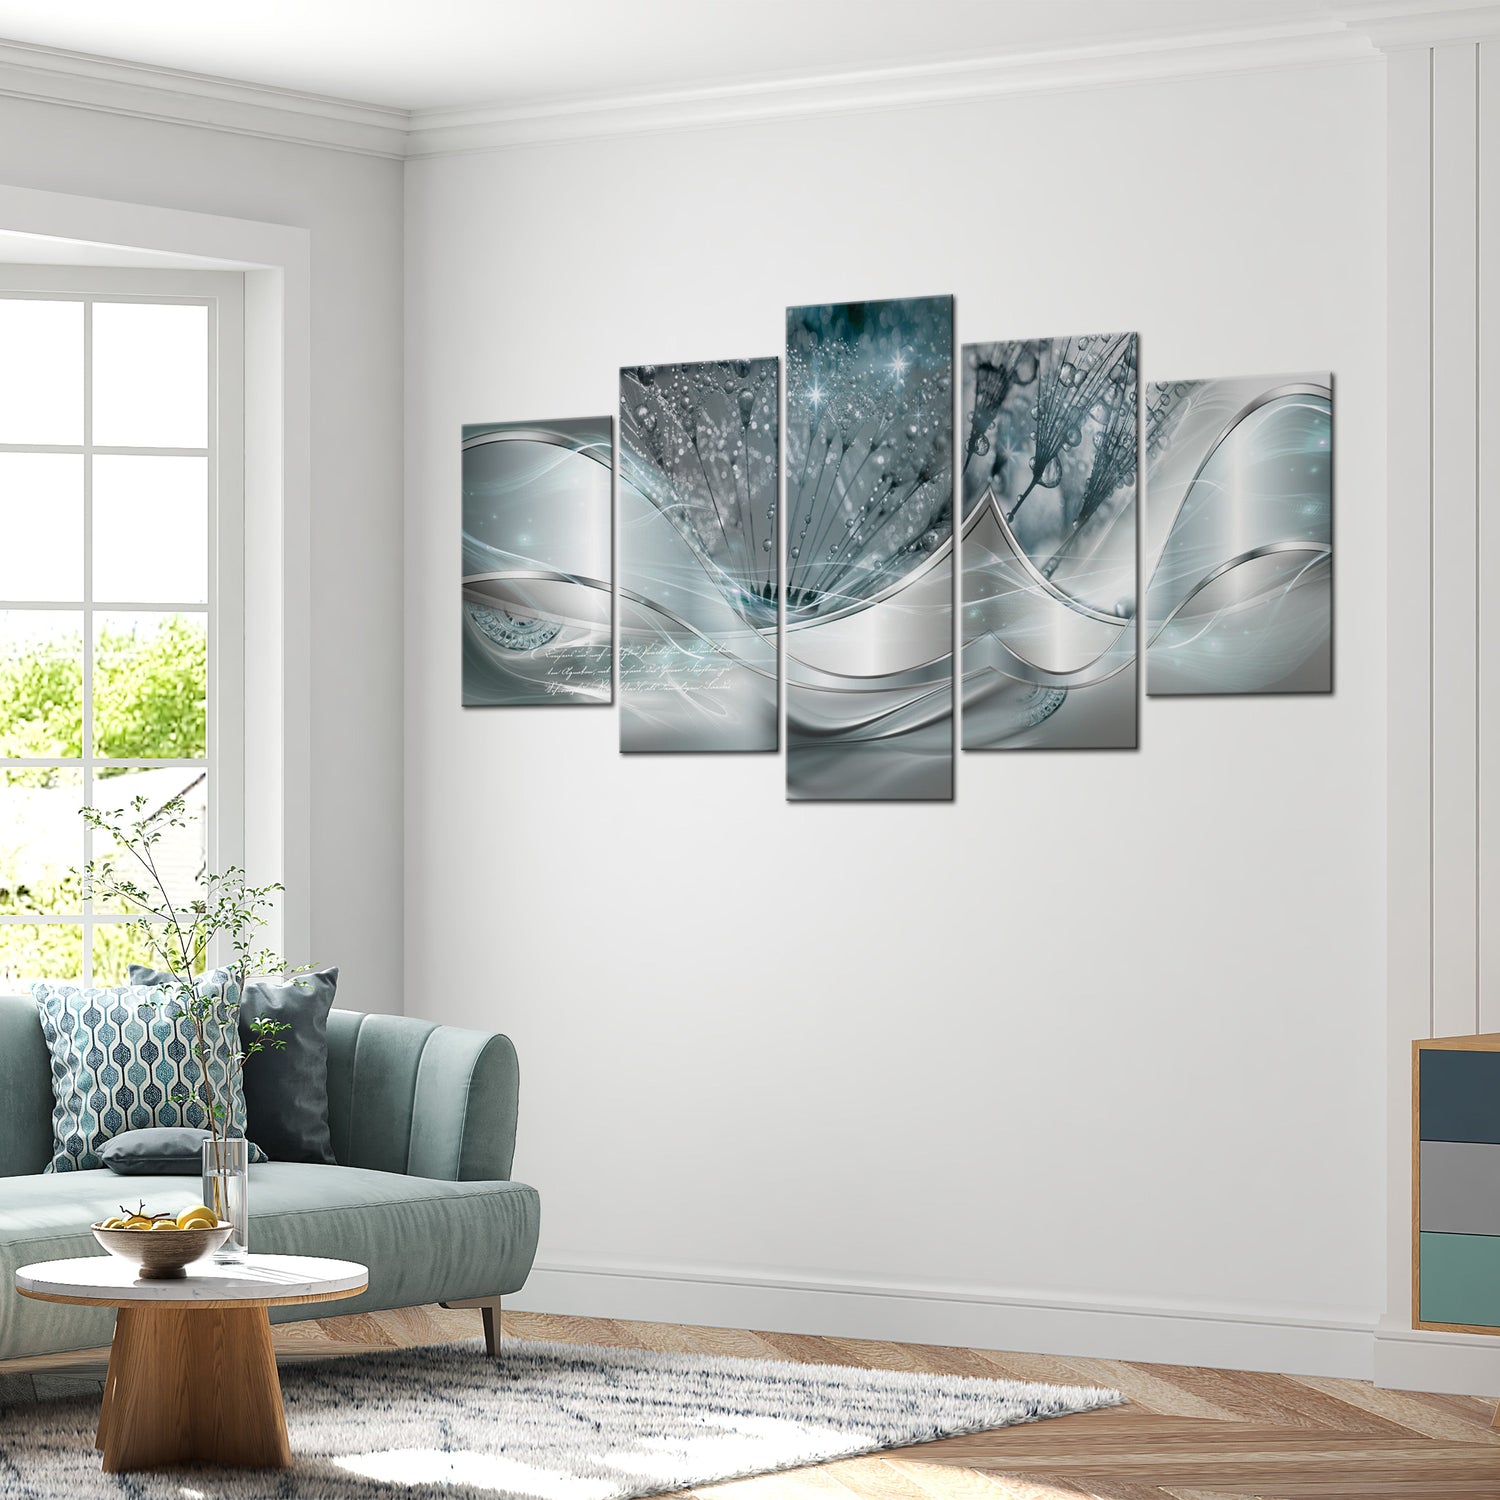 Glamour Canvas Wall Art - Sparkling Dandelions - 5 Pieces